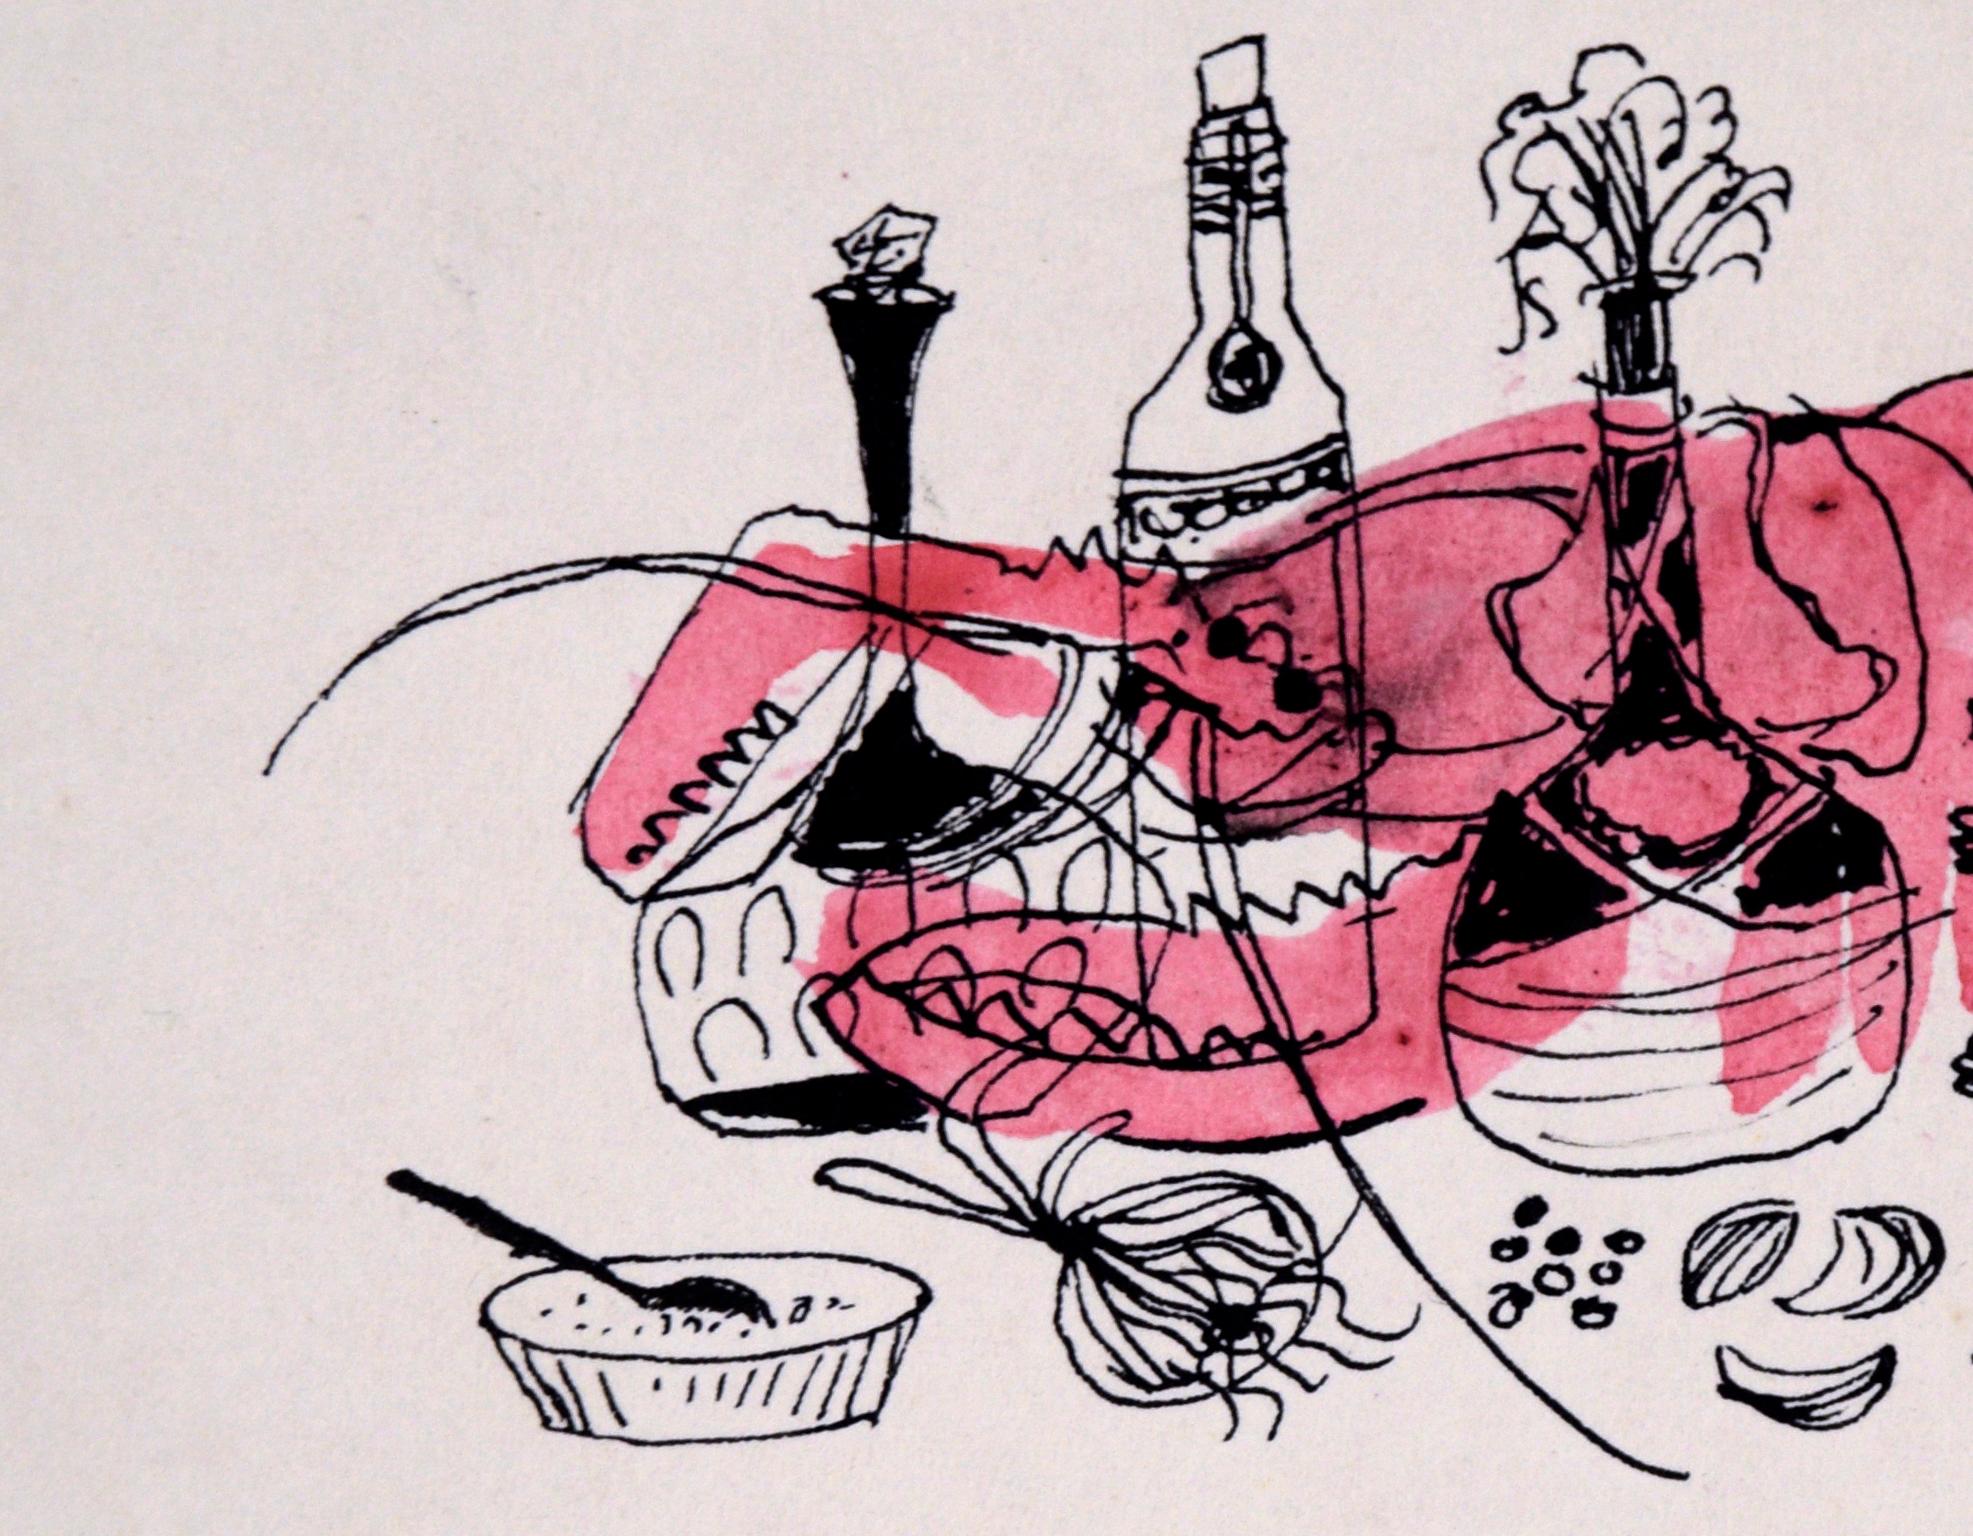 Chef Lobster - Vintage Illustration in Ink and Watercolor - Art by Irene Pattinson